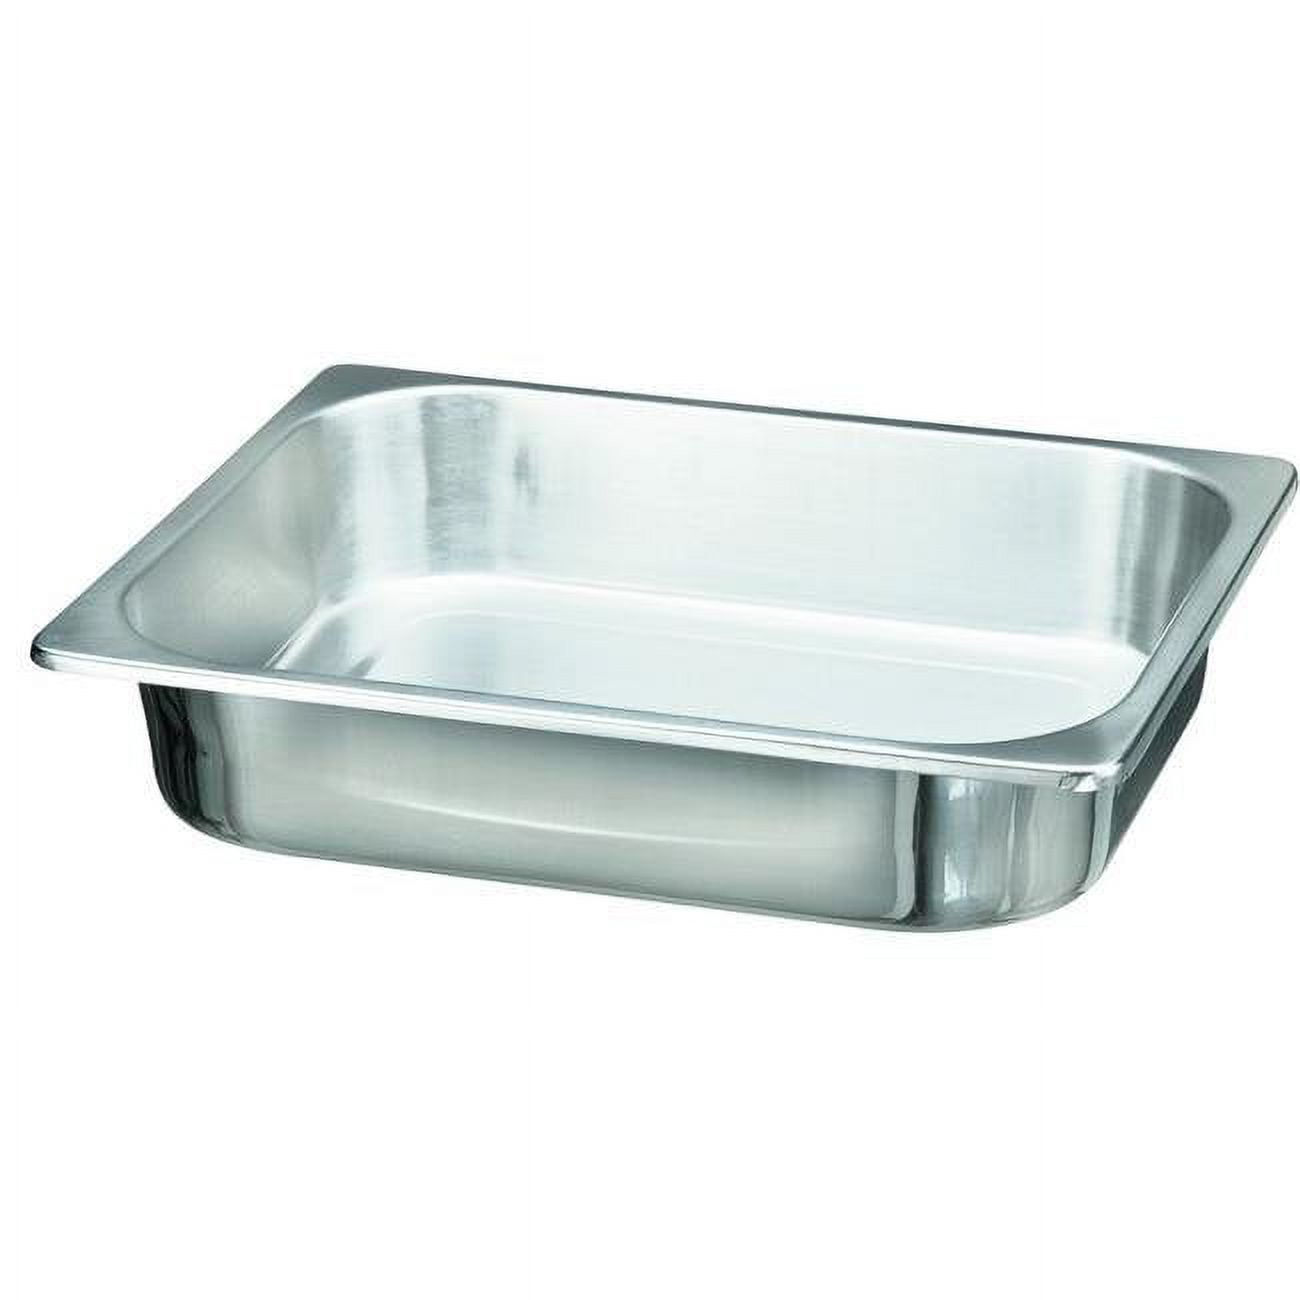 4259 12.125 X 8.625 X 2 In. Stainless Steel Instrument Tray With No Cover